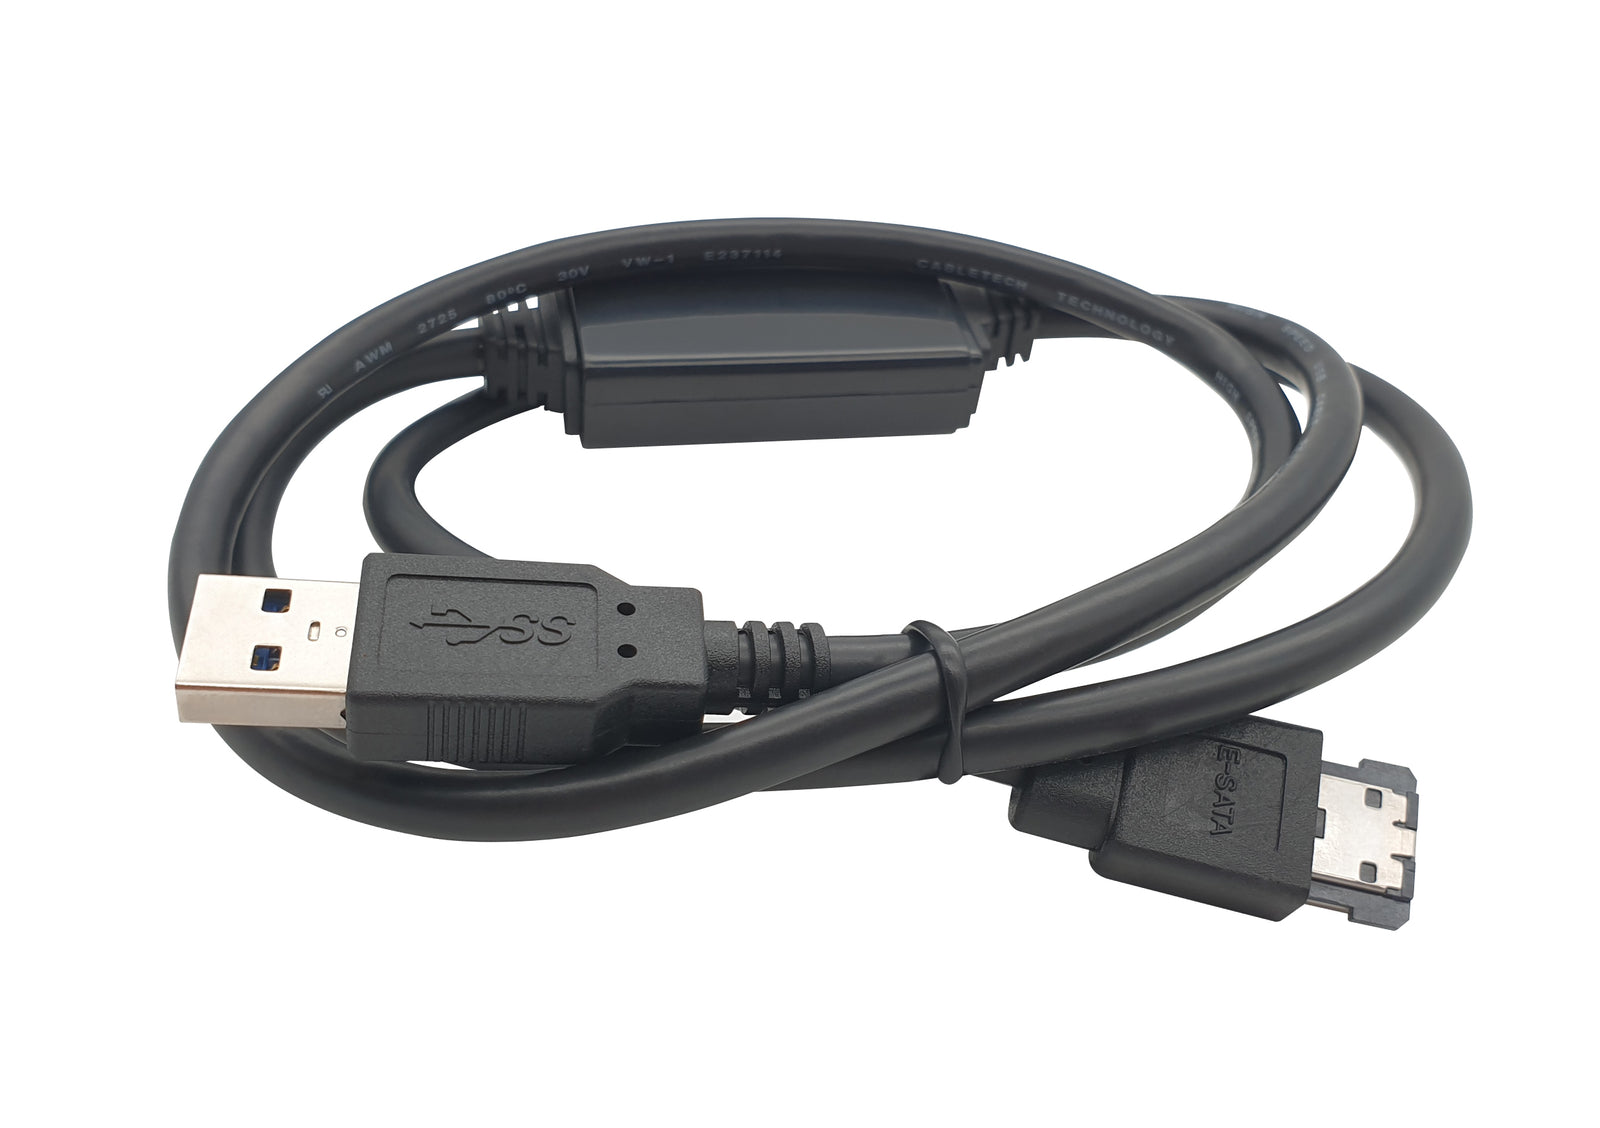 USB3 to eSATAp adapter cable